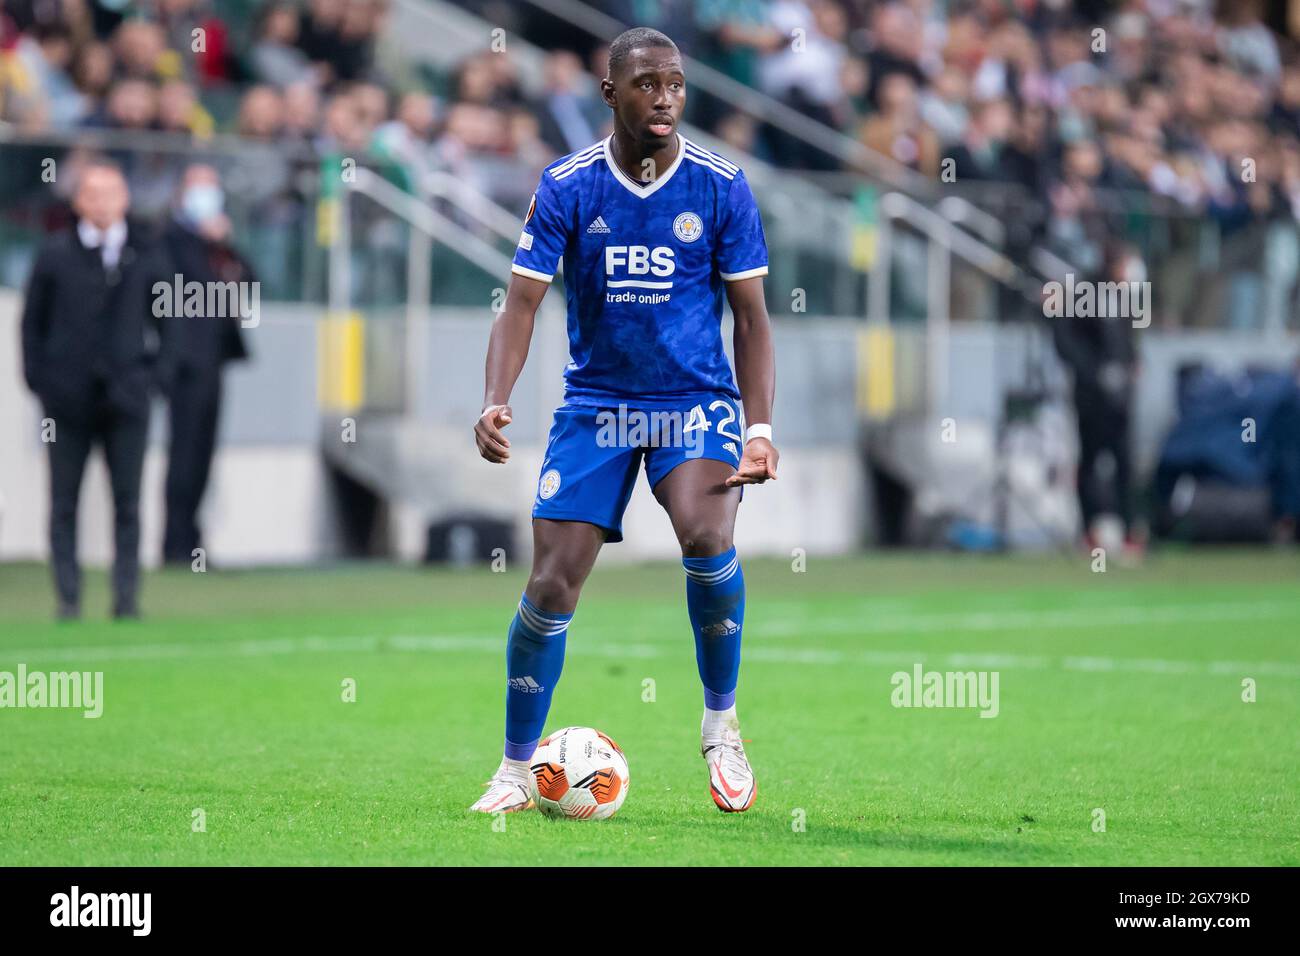 Boubakary Soumare of Leicester City FC seen in action during the UEFA Europa League Group Stage match between Legia Warszawa and Leicester City FC at Marshal Jozef Pilsudski Legia Warsaw Municipal Stadium.Final score; Legia Warszawa 1:0 Leicester City FC. Stock Photo